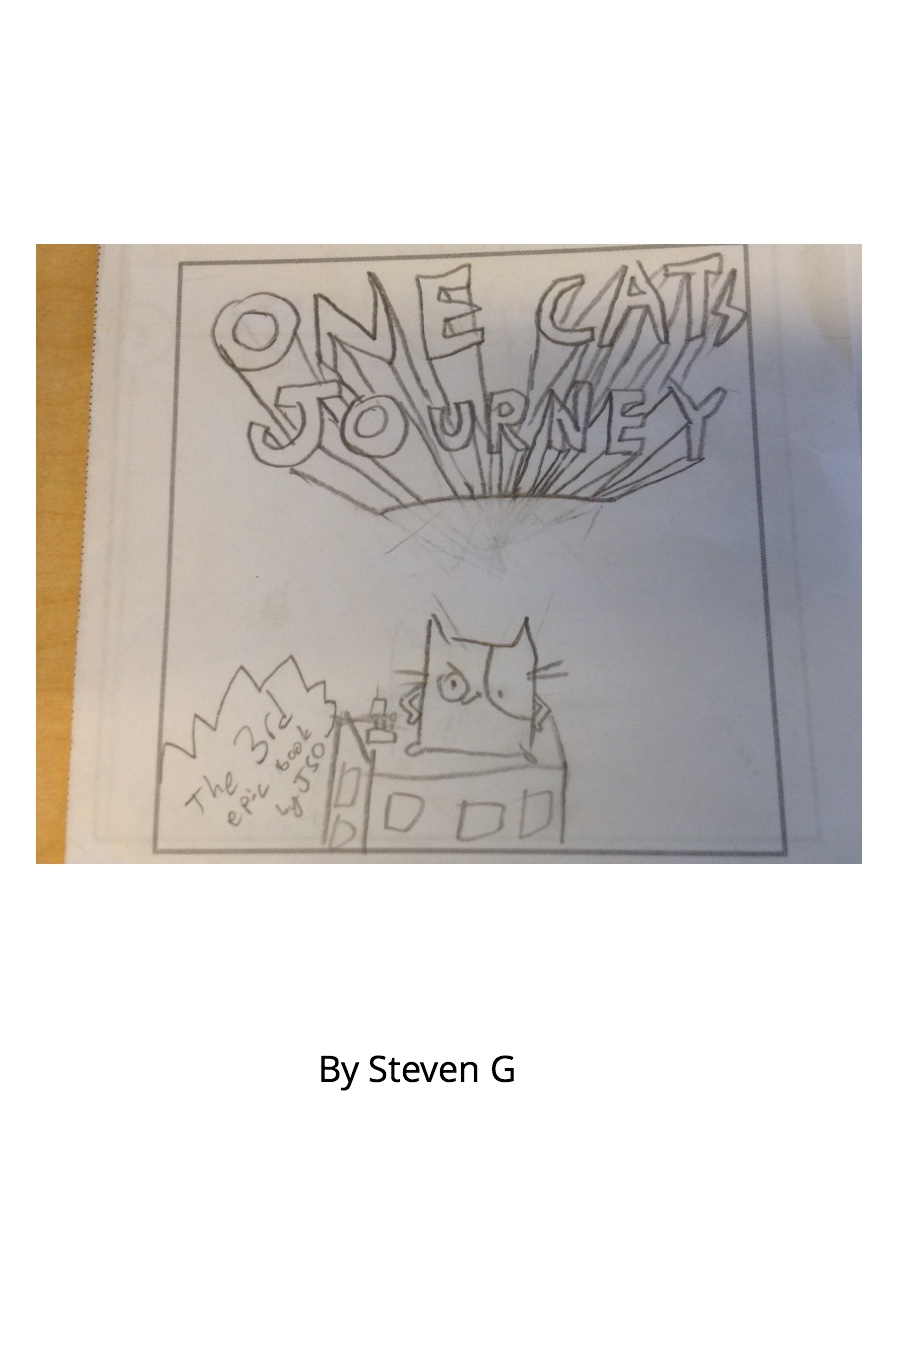 One Cat’s Journey by Steven G